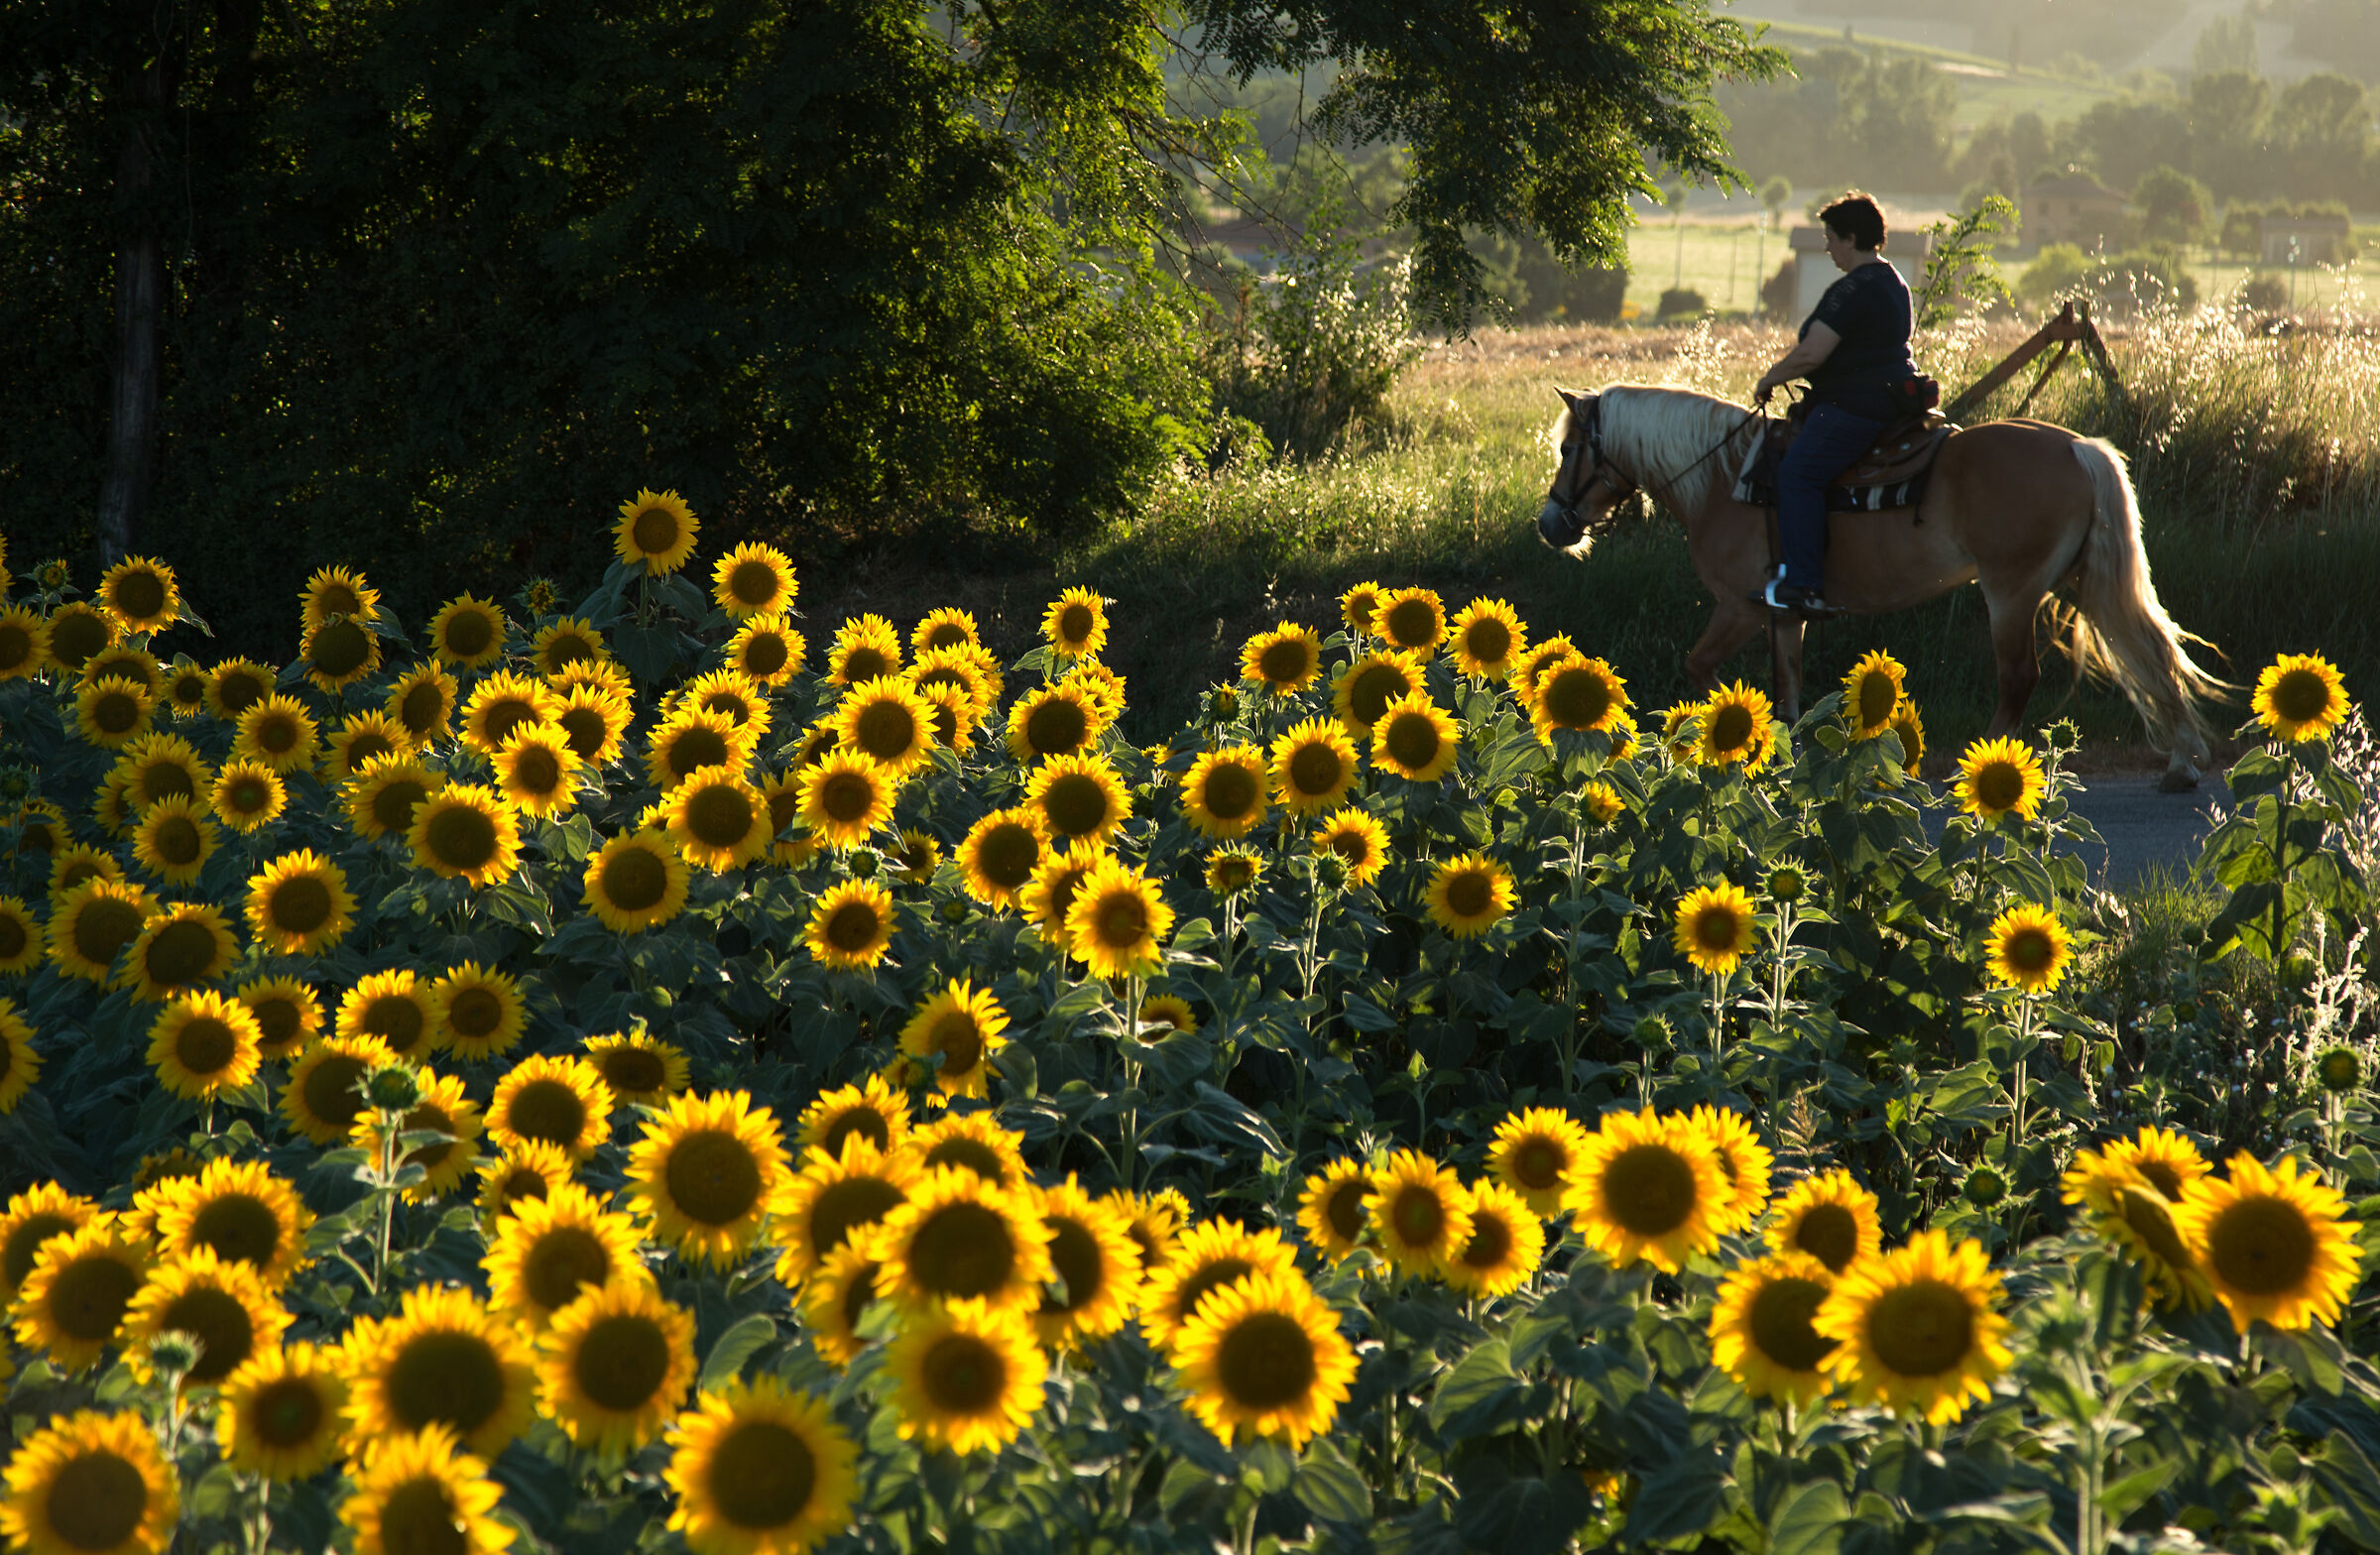 The sunflowers of the stable...